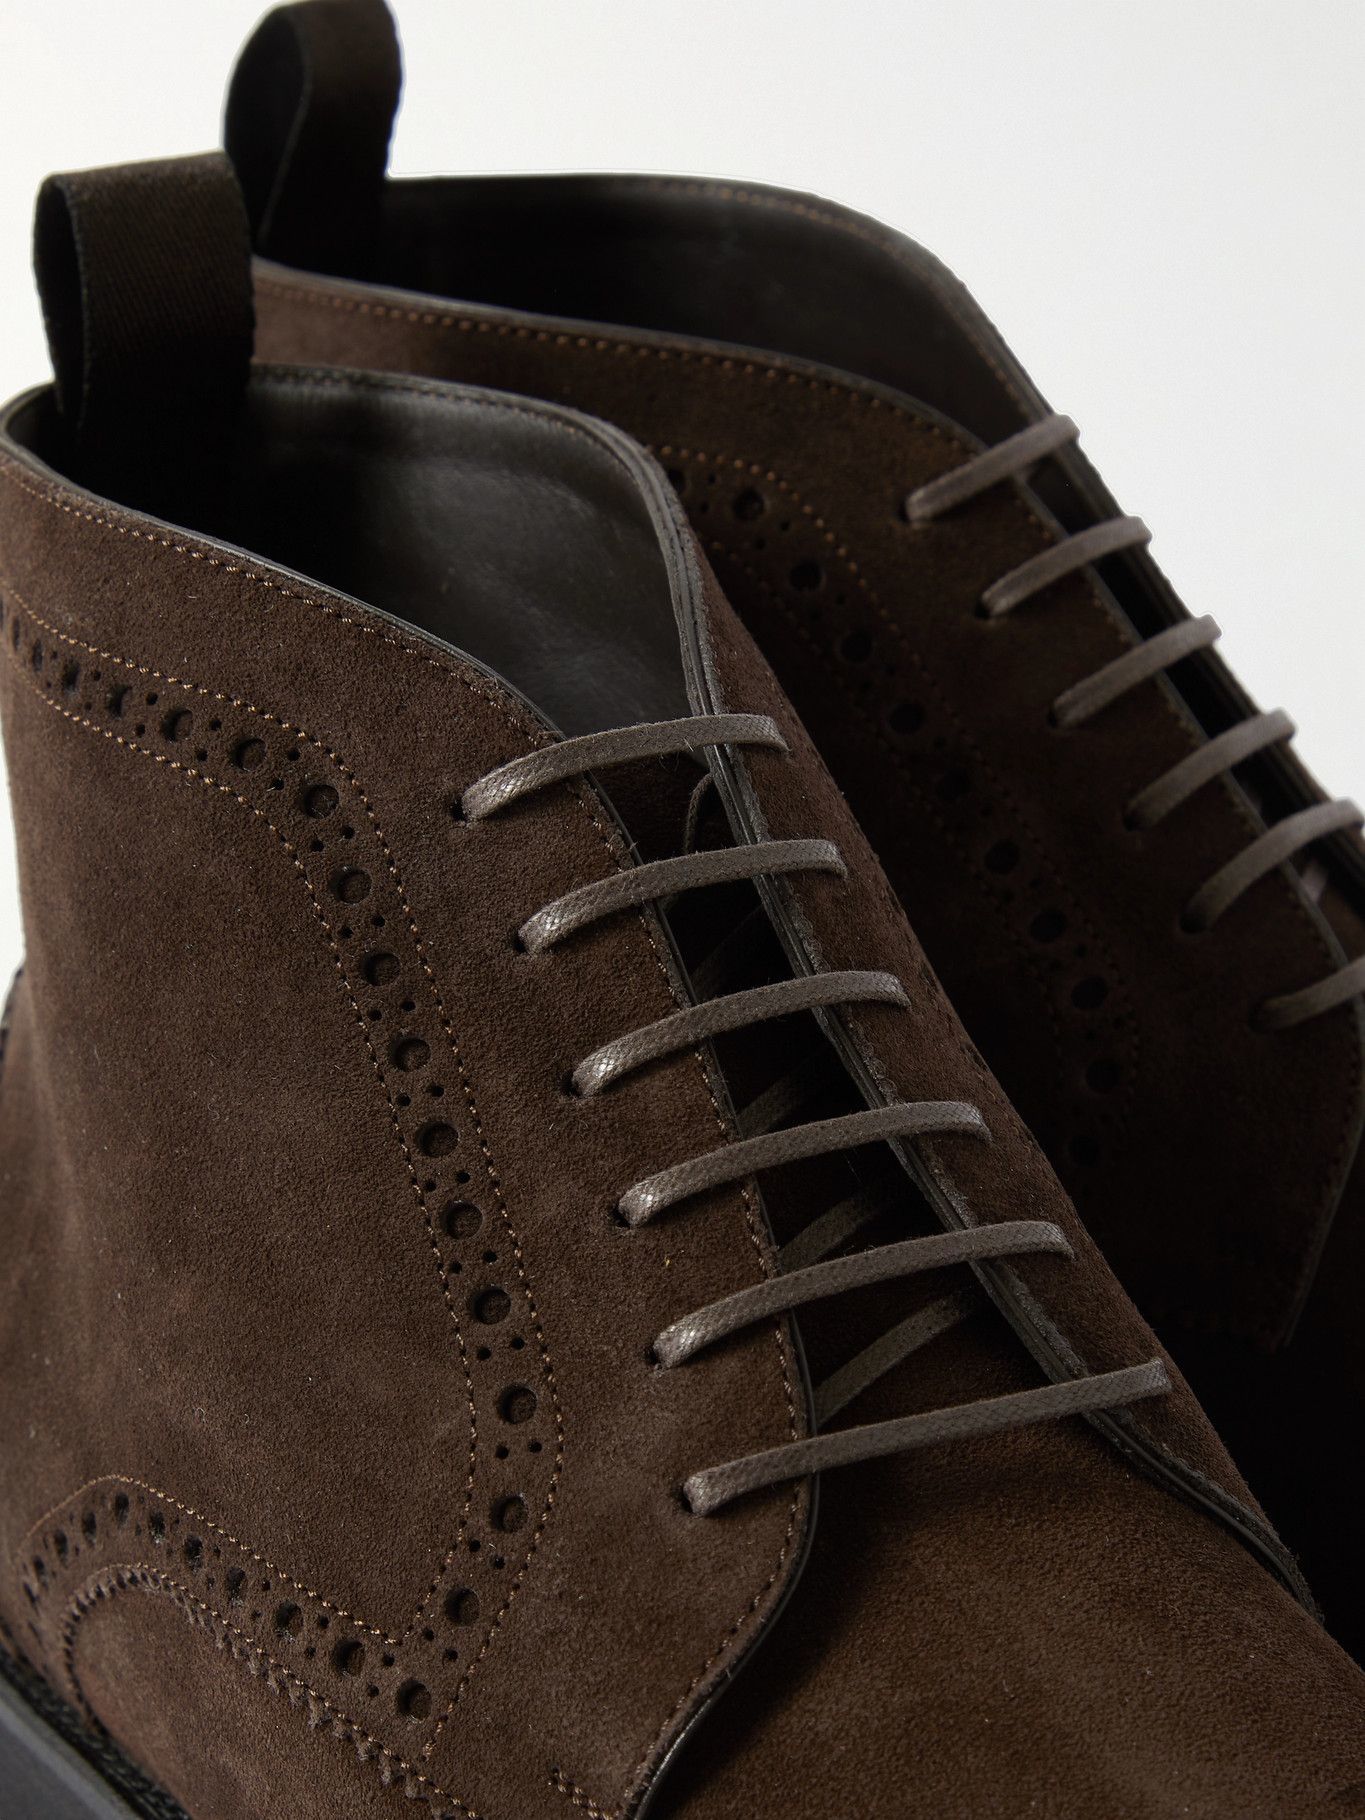 TOM FORD - Suede Chukka Boots - Brown TOM FORD